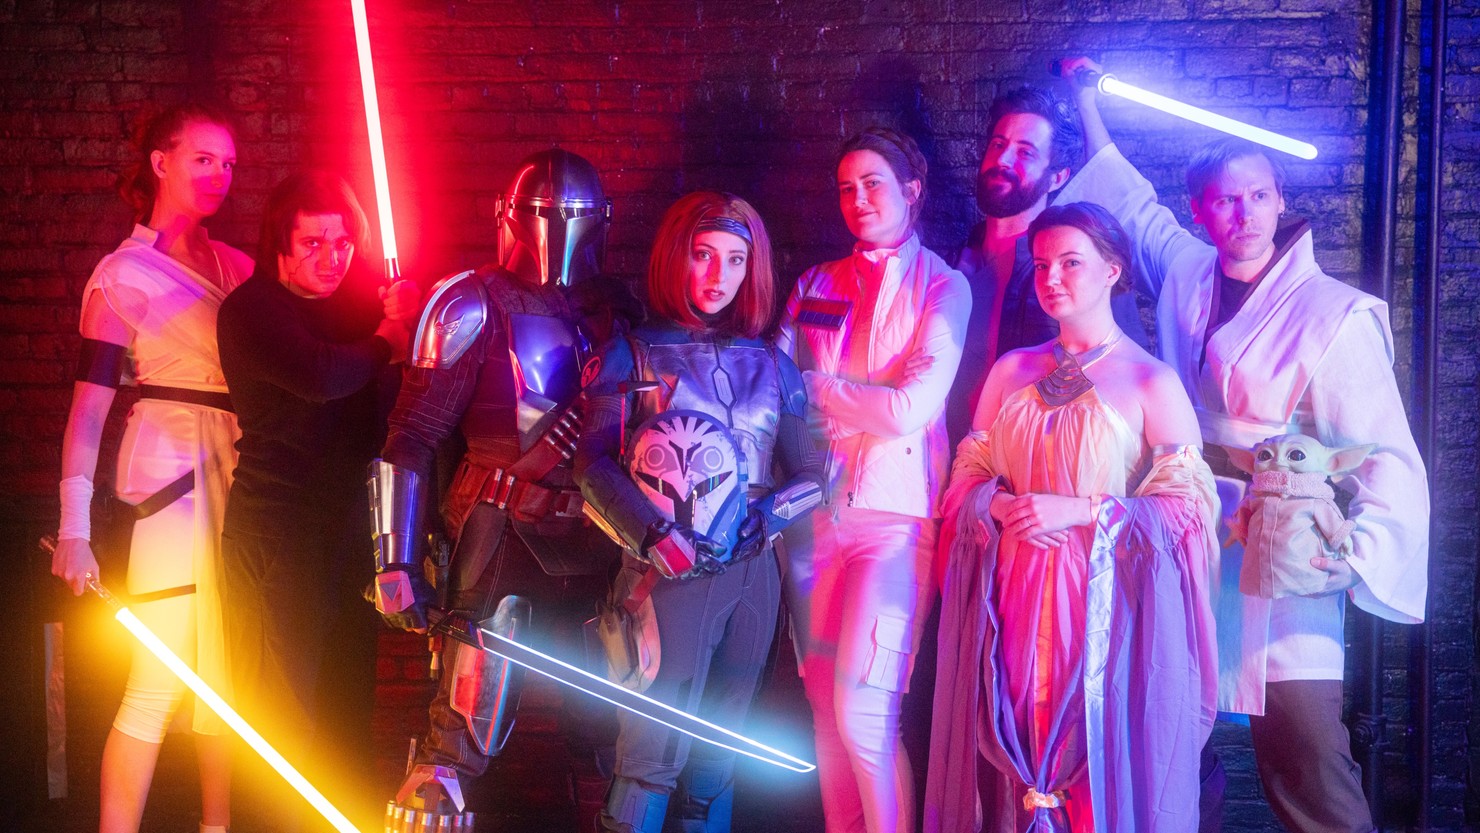 Eight Star Wars cosplayers in various poses.